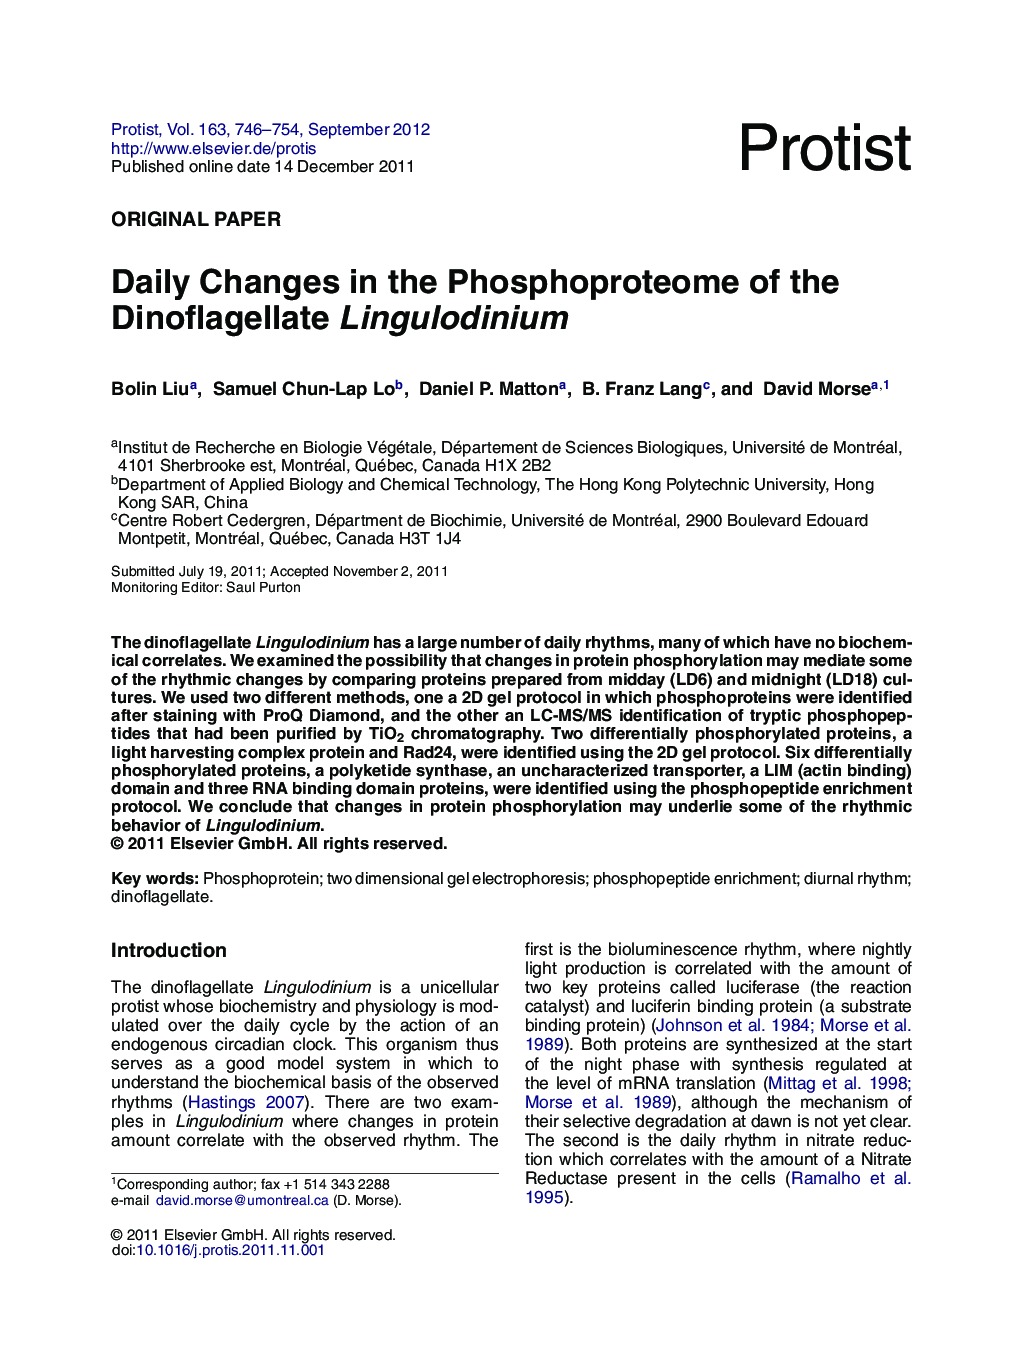 Daily Changes in the Phosphoproteome of the Dinoflagellate Lingulodinium